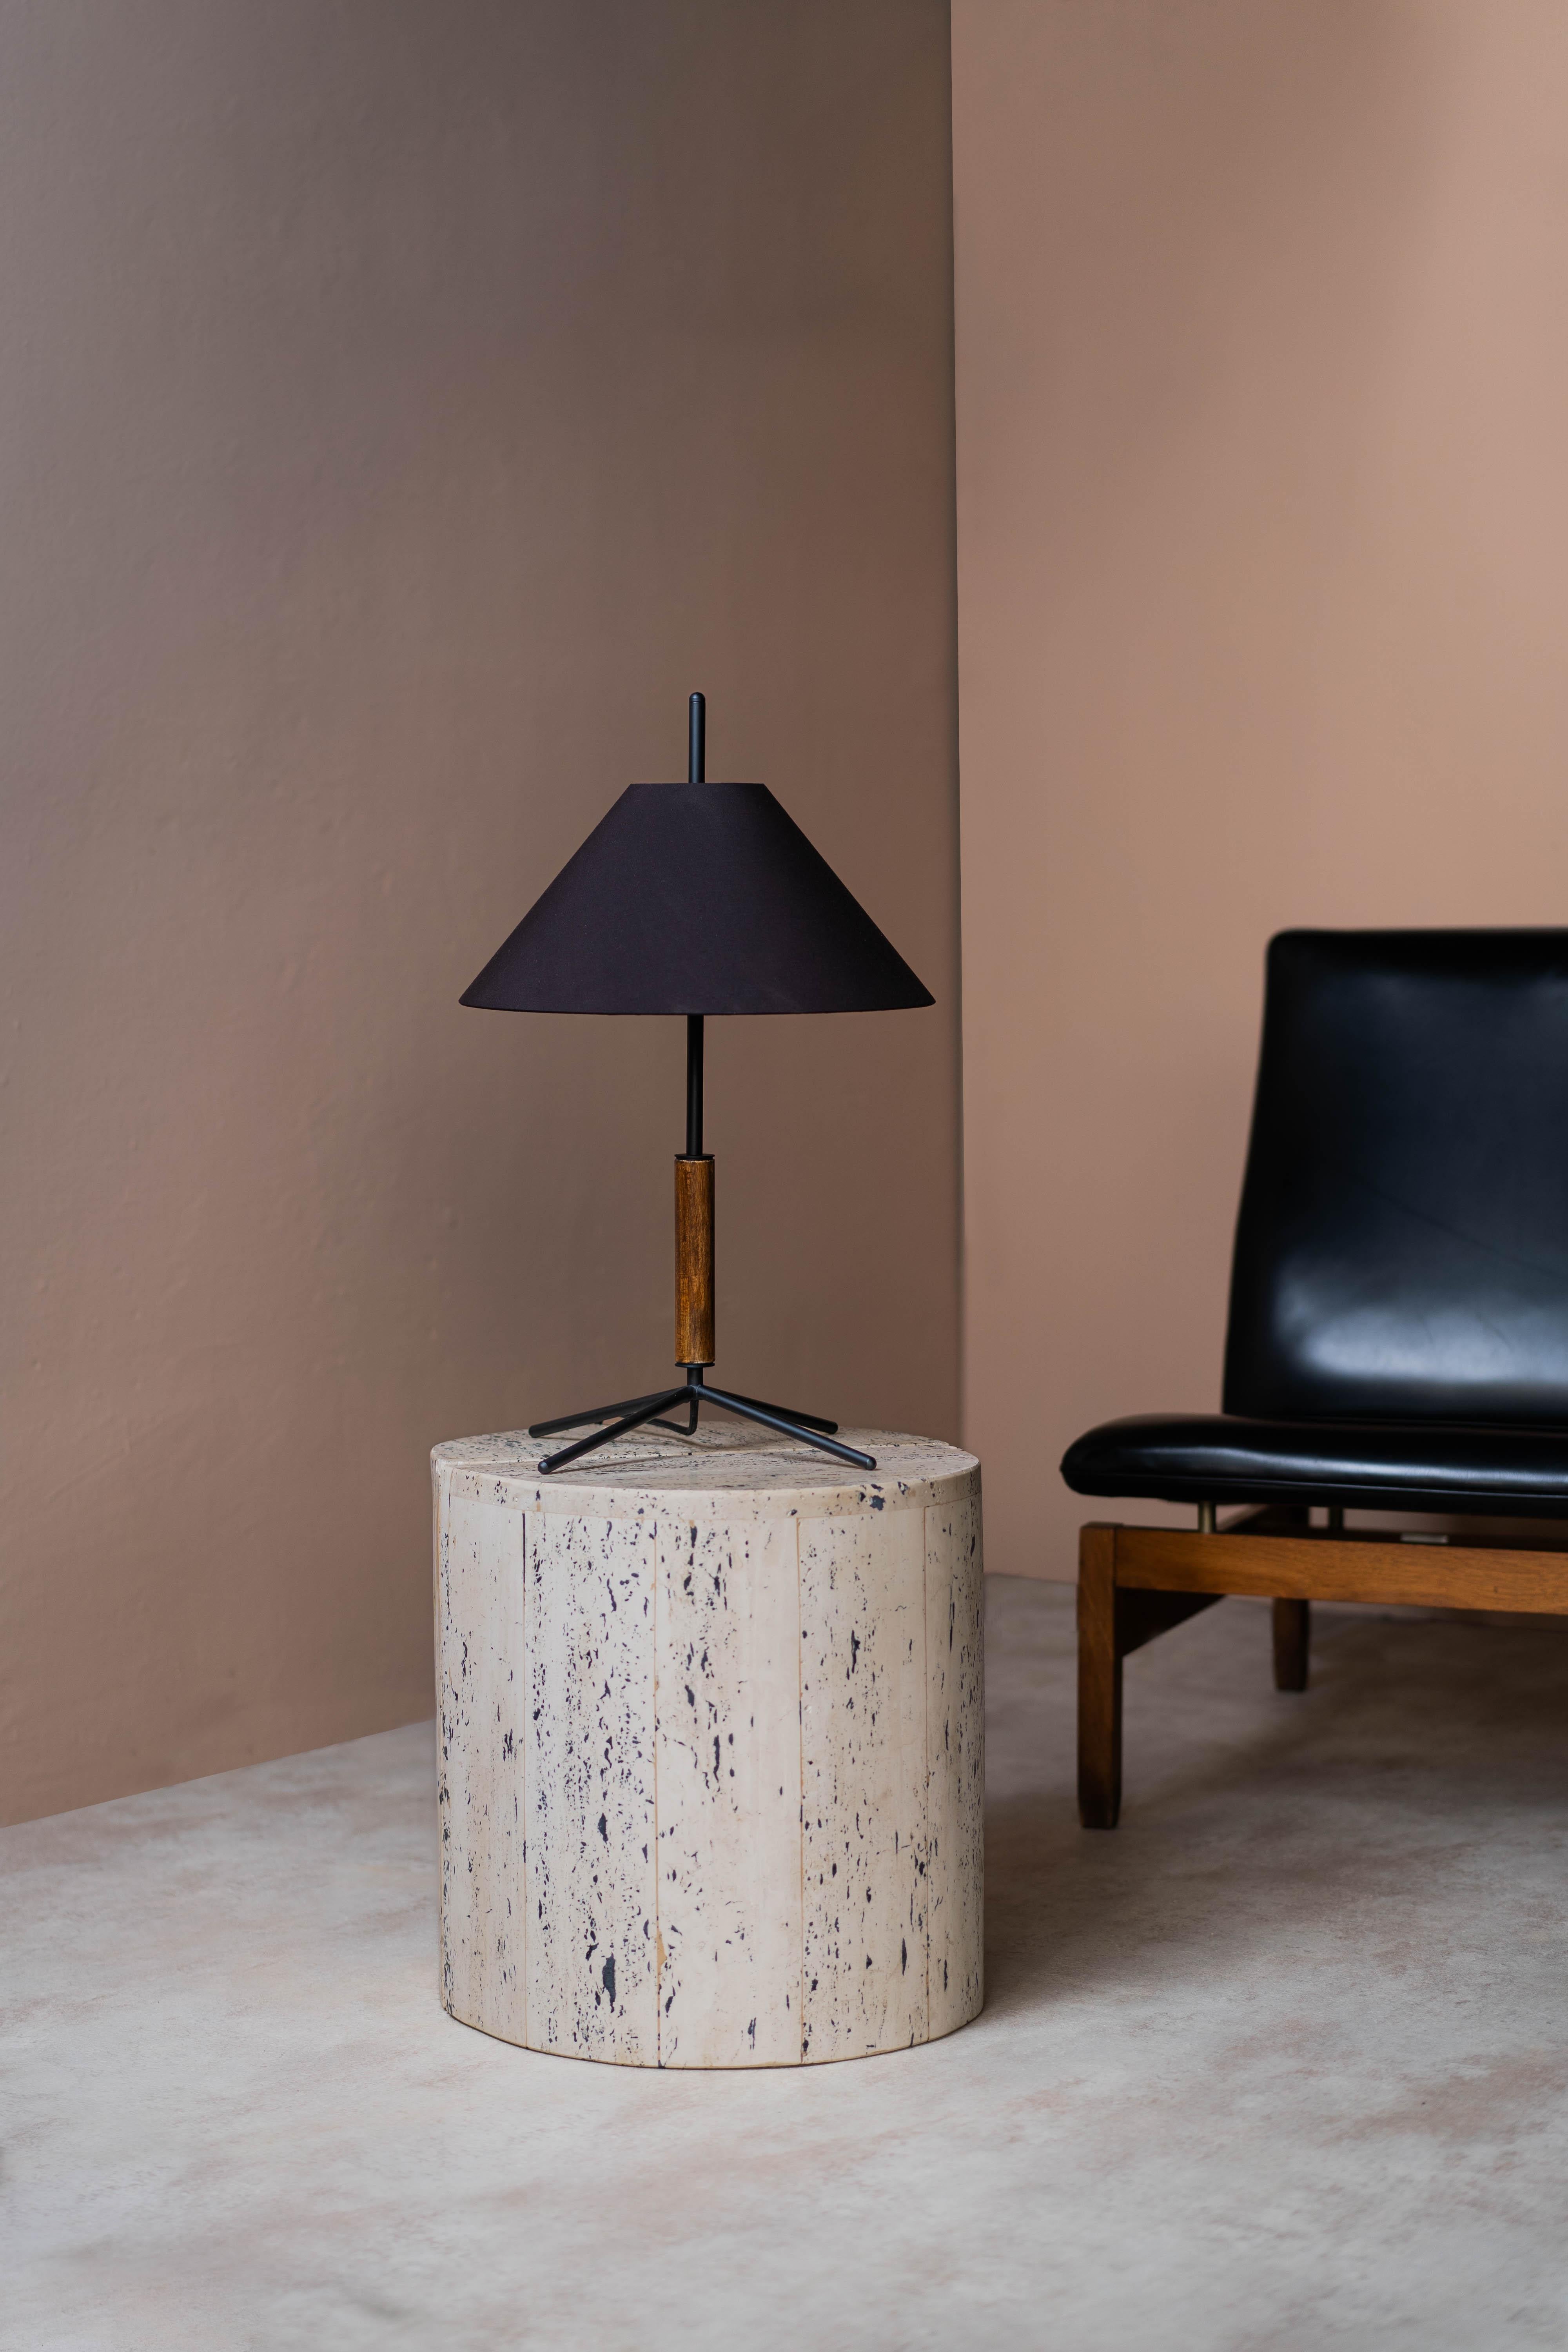 The VOL table lamp has a simple combination of lines and volumes, which create a geometric sculptural form, while being optimal in its shape for lighting spaces. 
It has a conical shade, a structure that combines metal with natural wood, and a